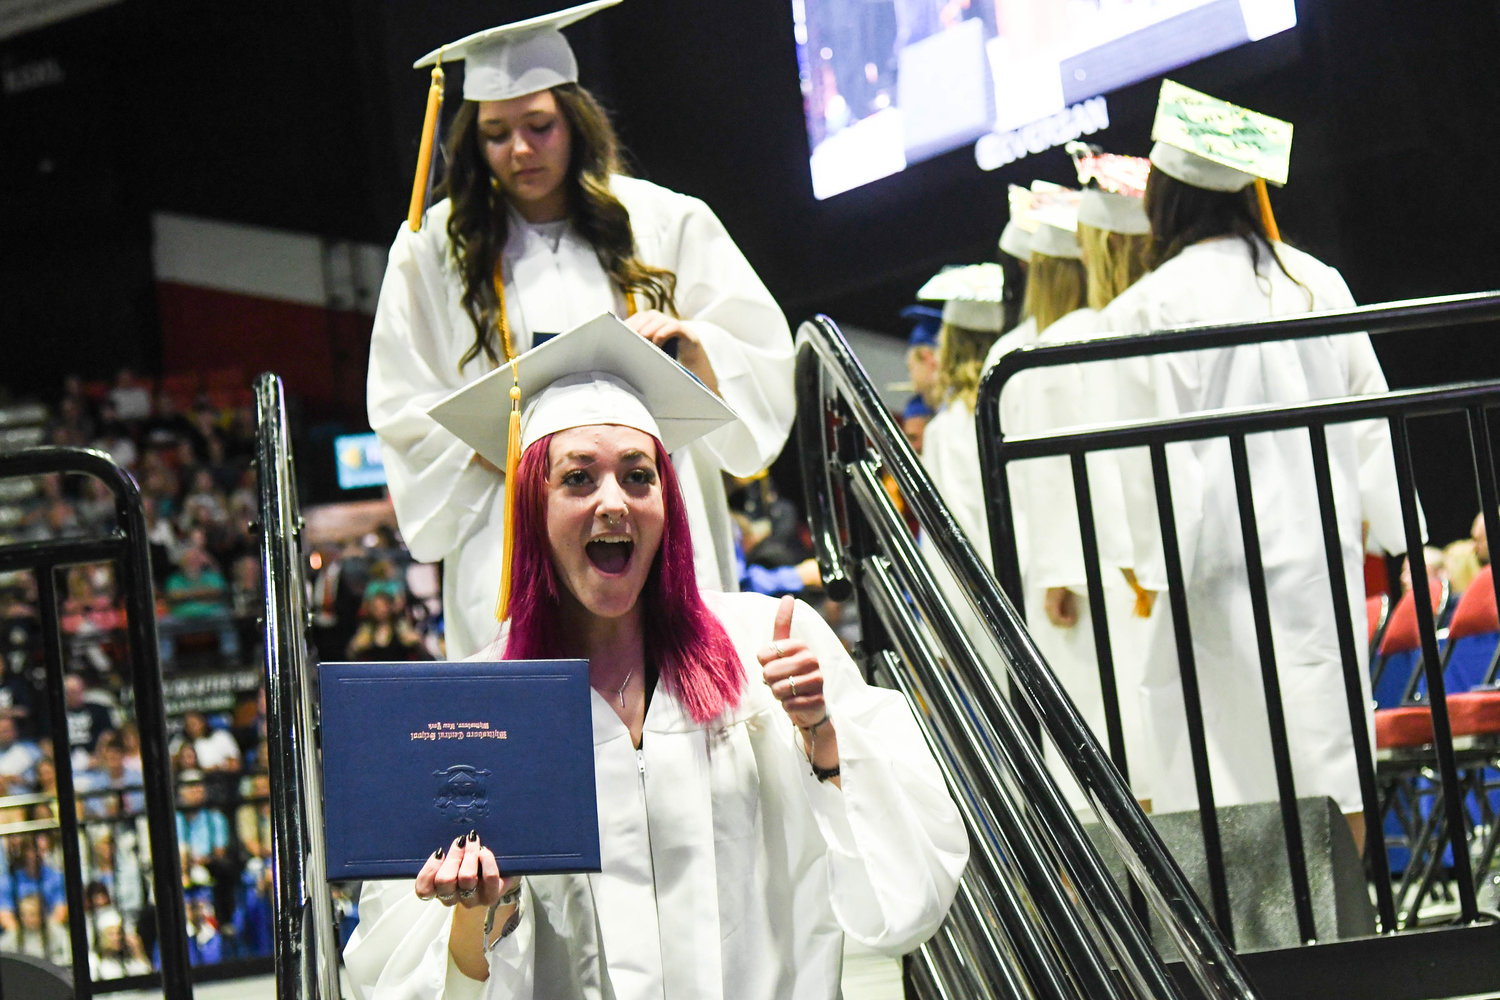 Ava Block gives a thumbs up to the crowd after receiving her diploma during Whitesboro High School's 87th annual commencement ceremony for the class of 2022 on Saturday at the Adirondack Bank Center at the Utica Memorial Auditorium.